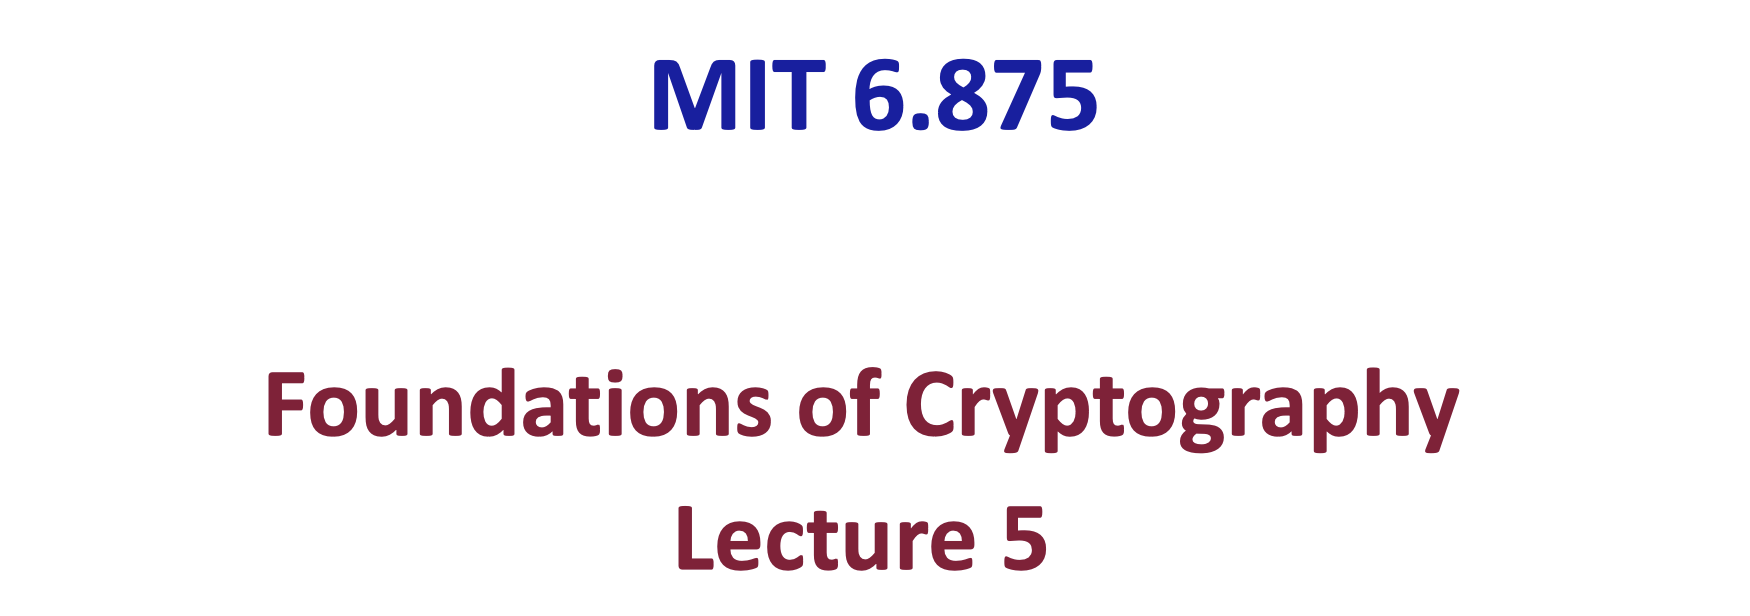 「Cryptography-MIT6875」: Lecture 5